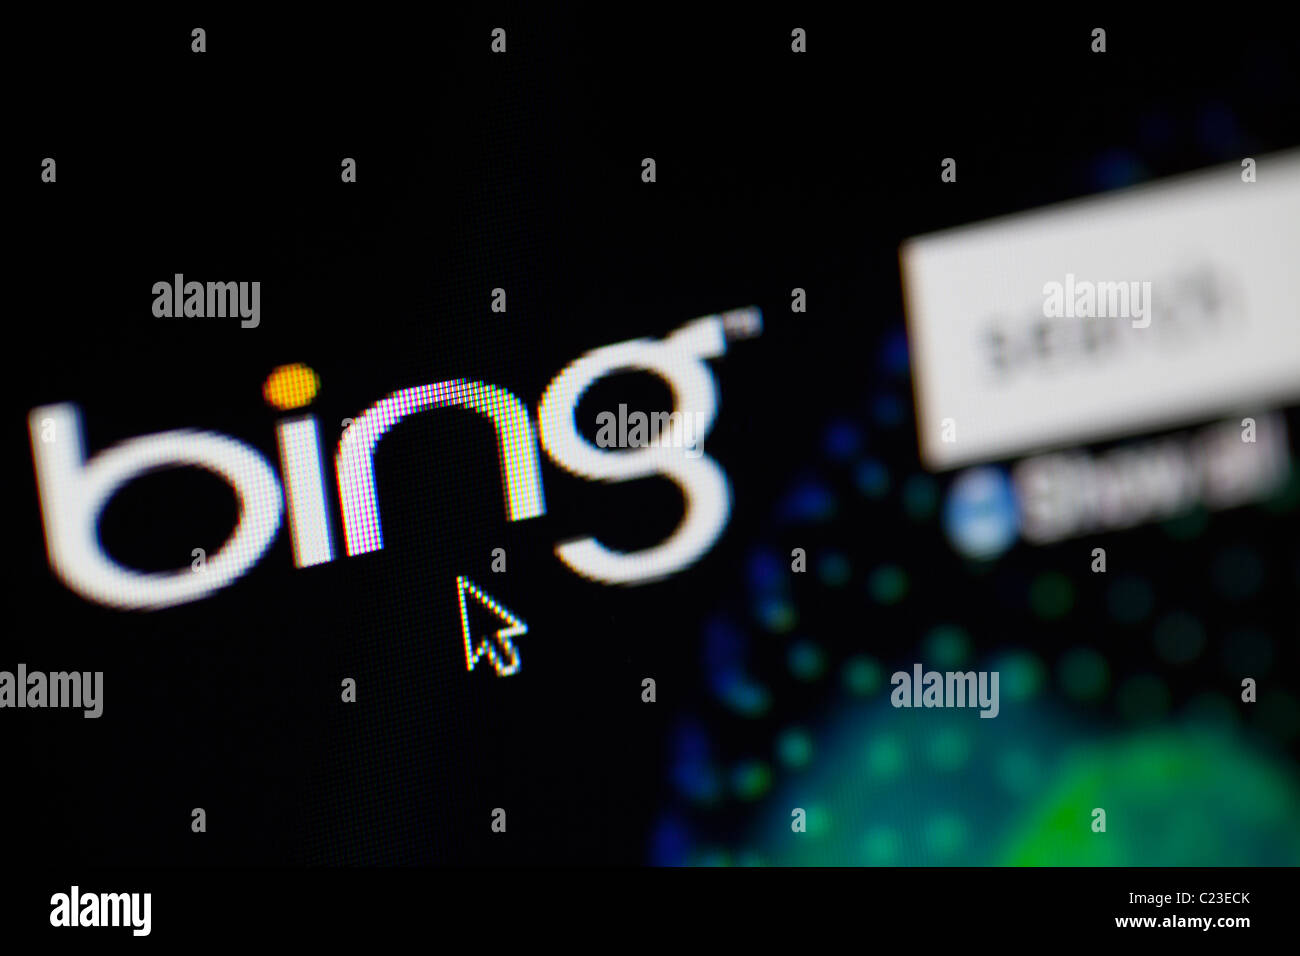 Bing internet search engine from Microsoft Stock Photo